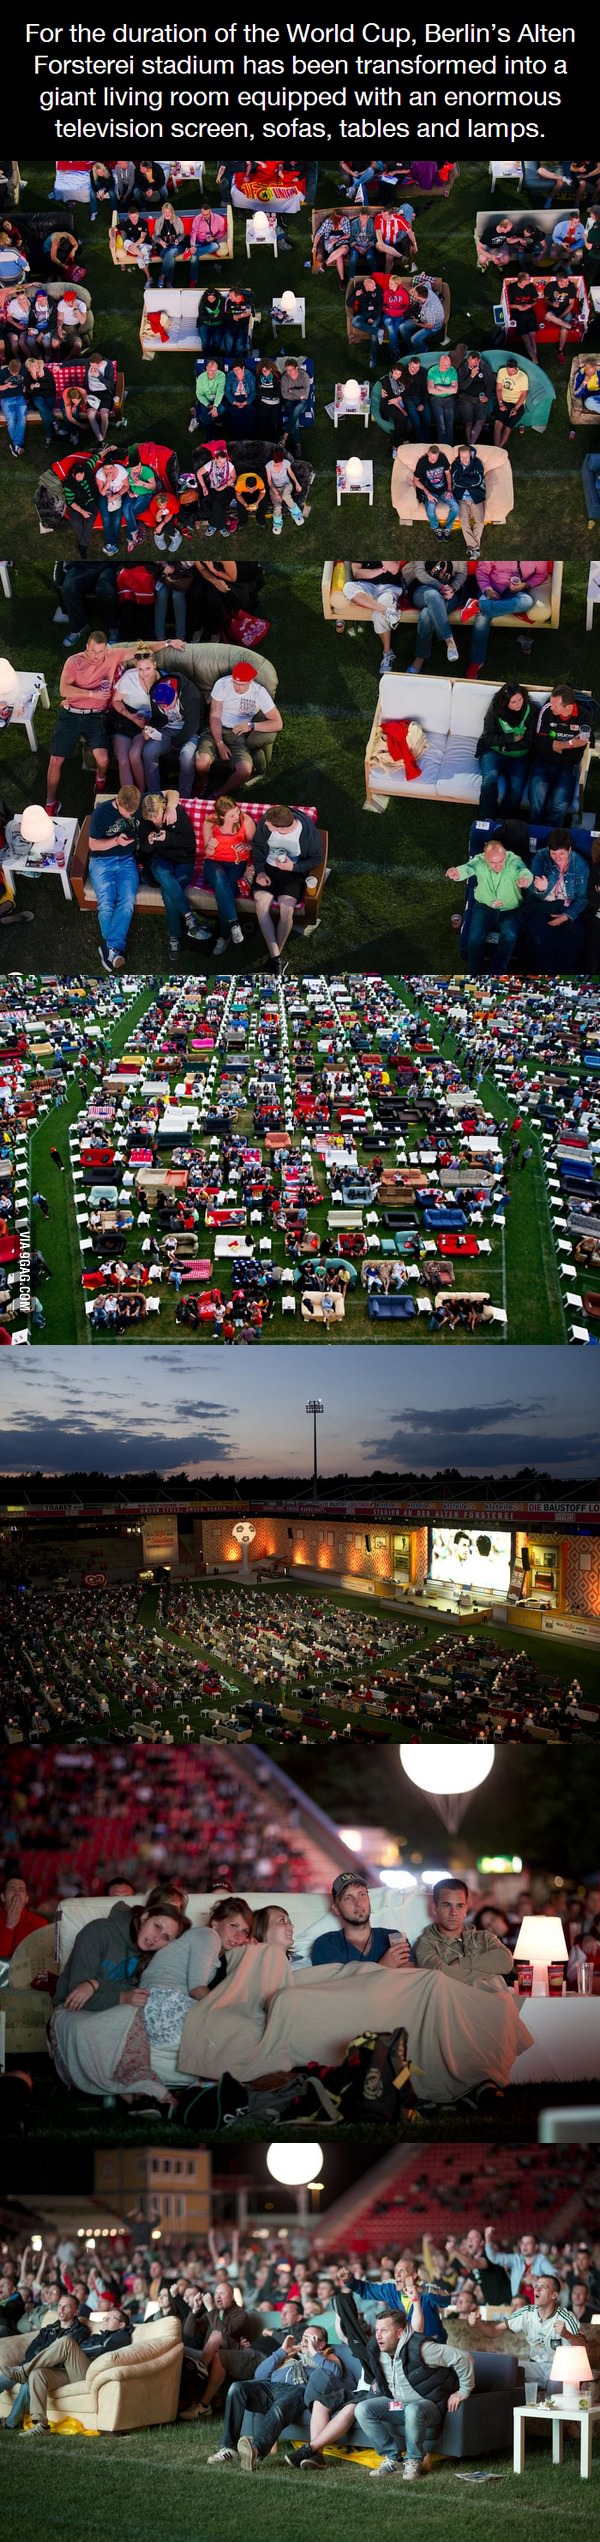 alten forsterei stadium in berlin has been transformed into a giant living room during world cup